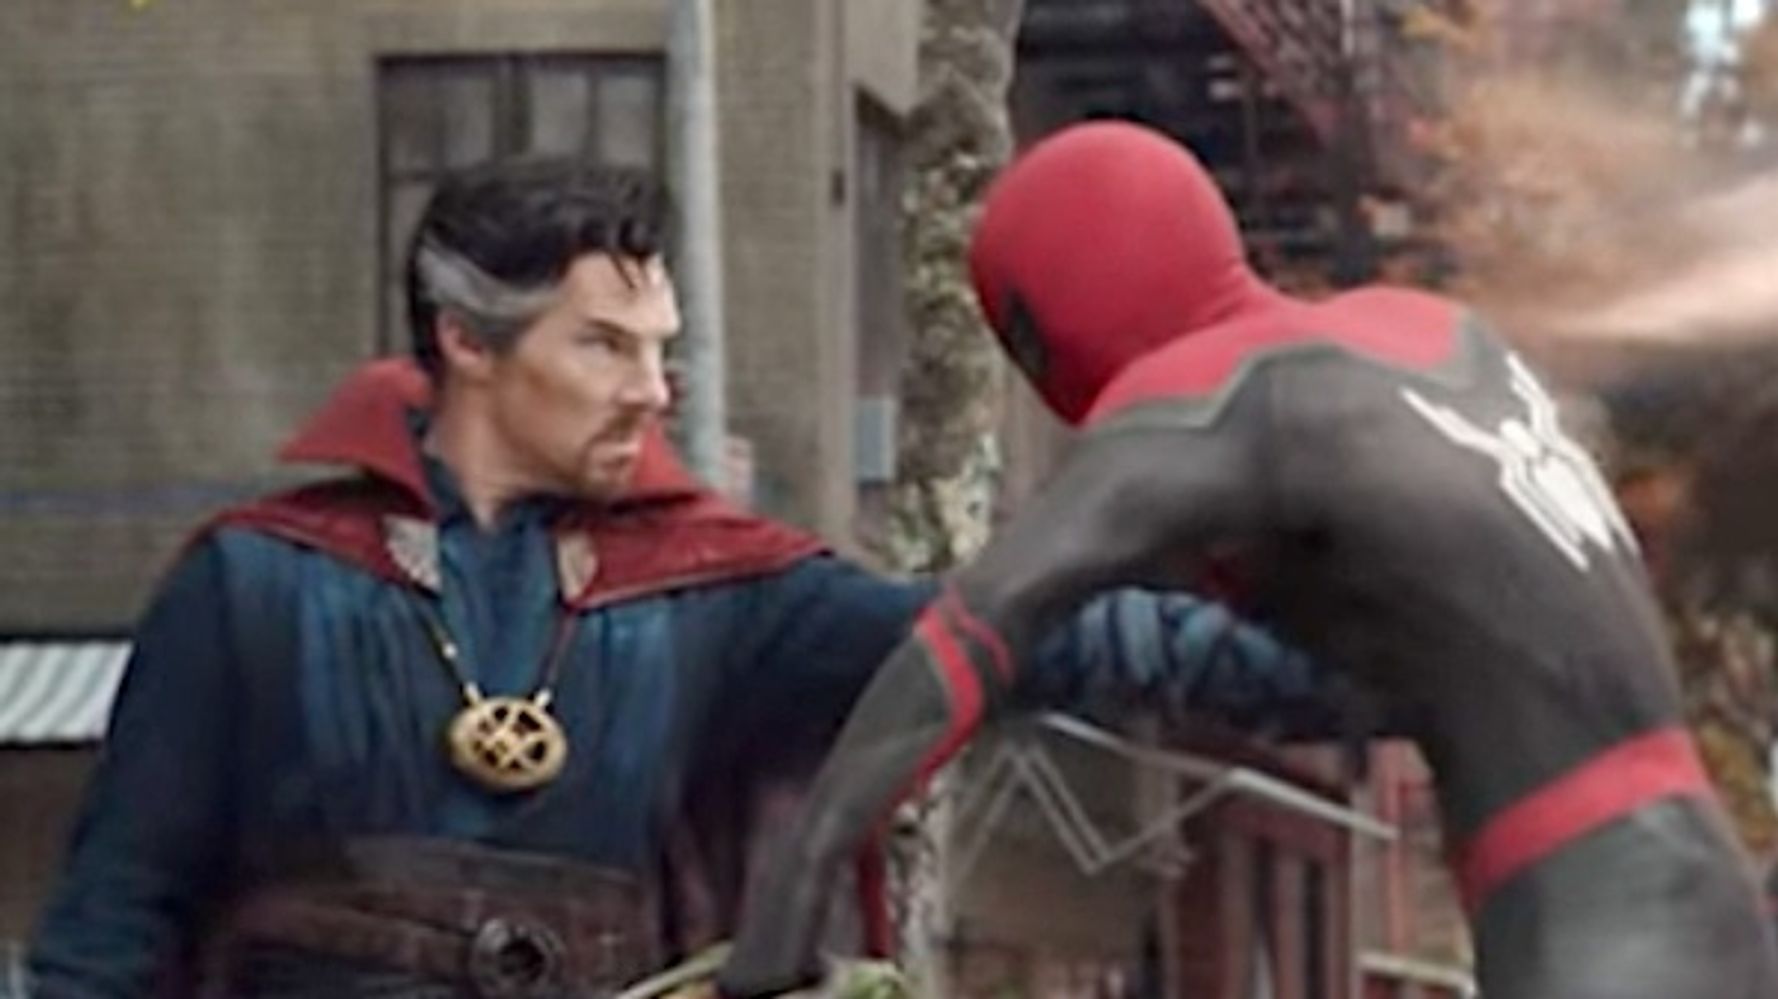 A new Spider-Man trailer is released and, yes, Marvel is officially going there